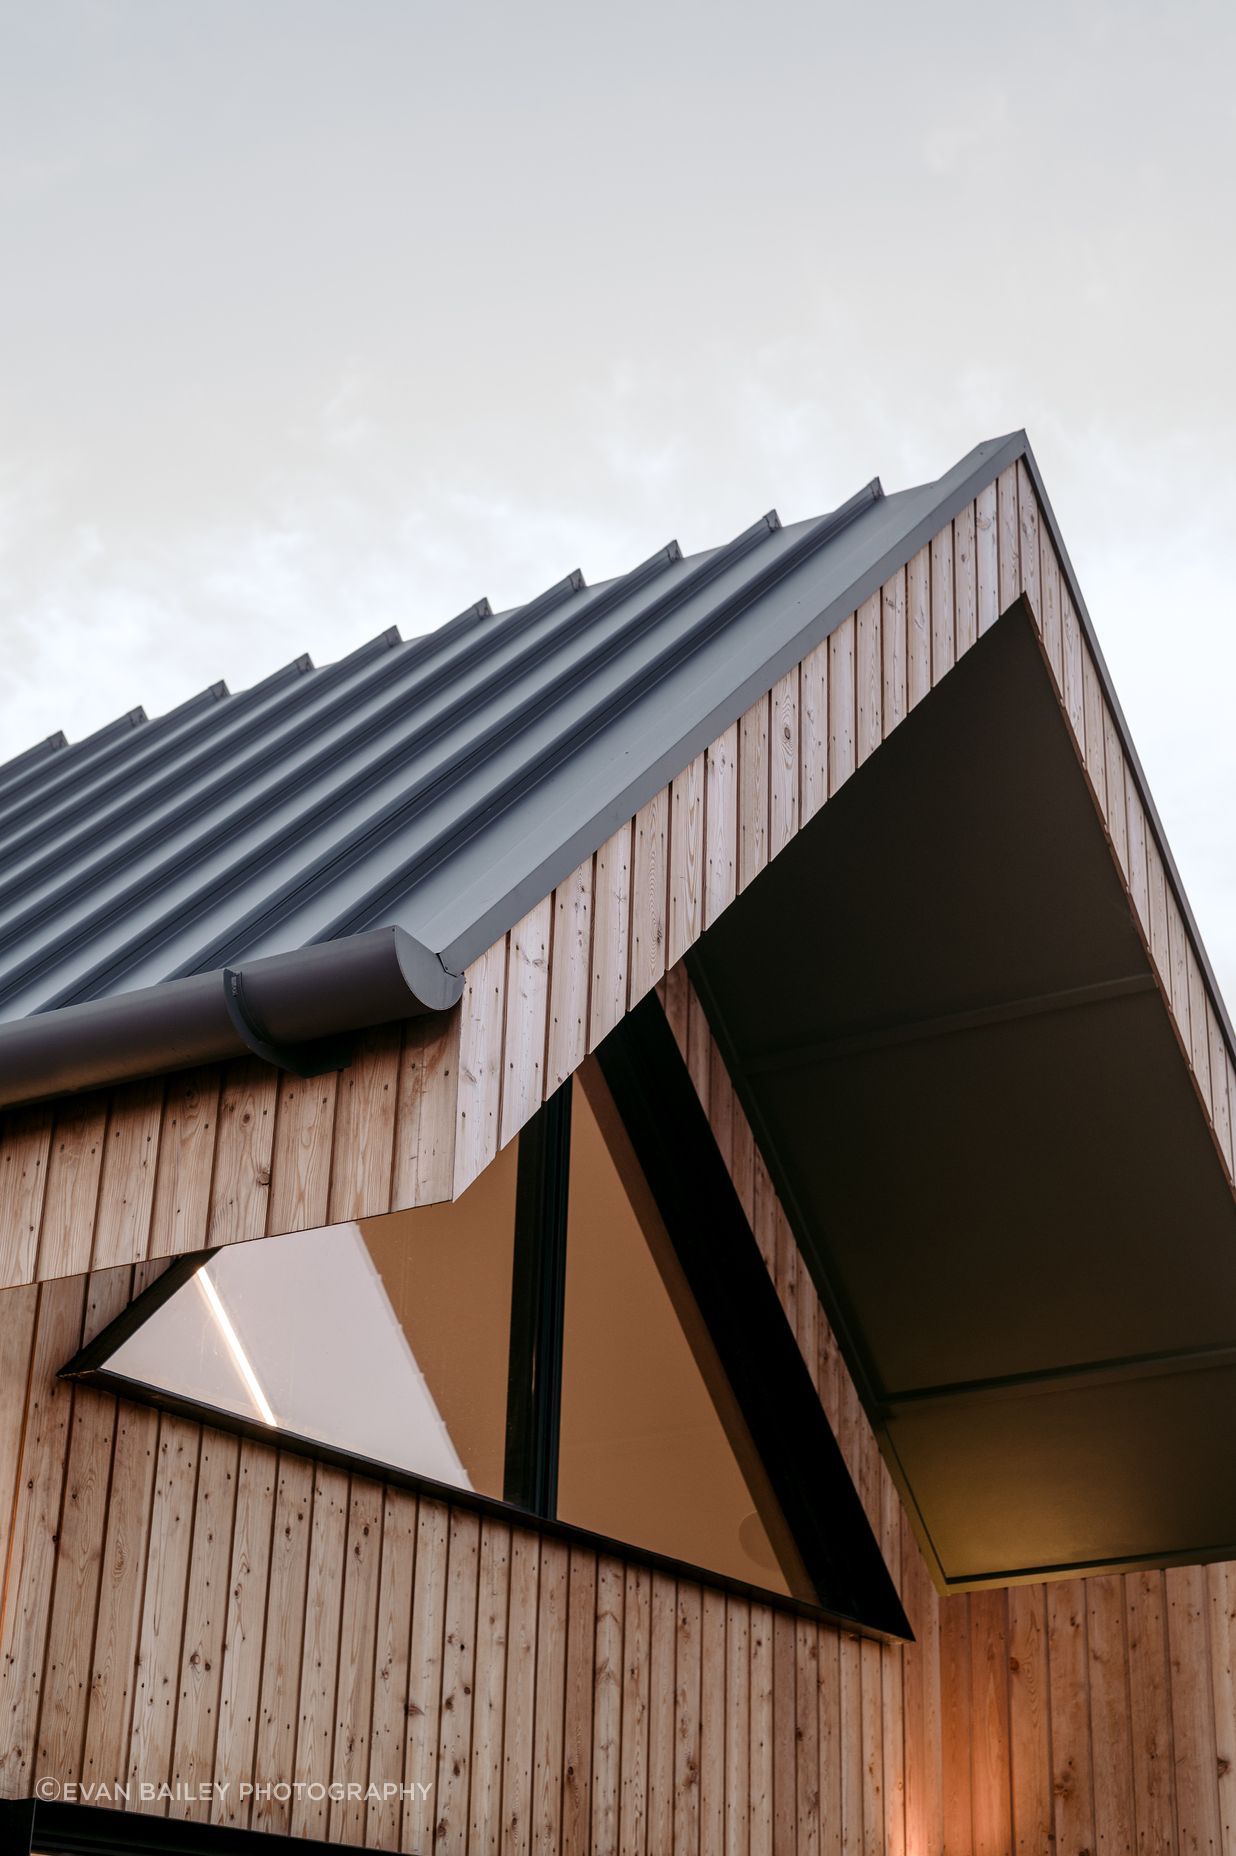 Siberian larch timber cladding encases the property, protecting it from the southerly winds.